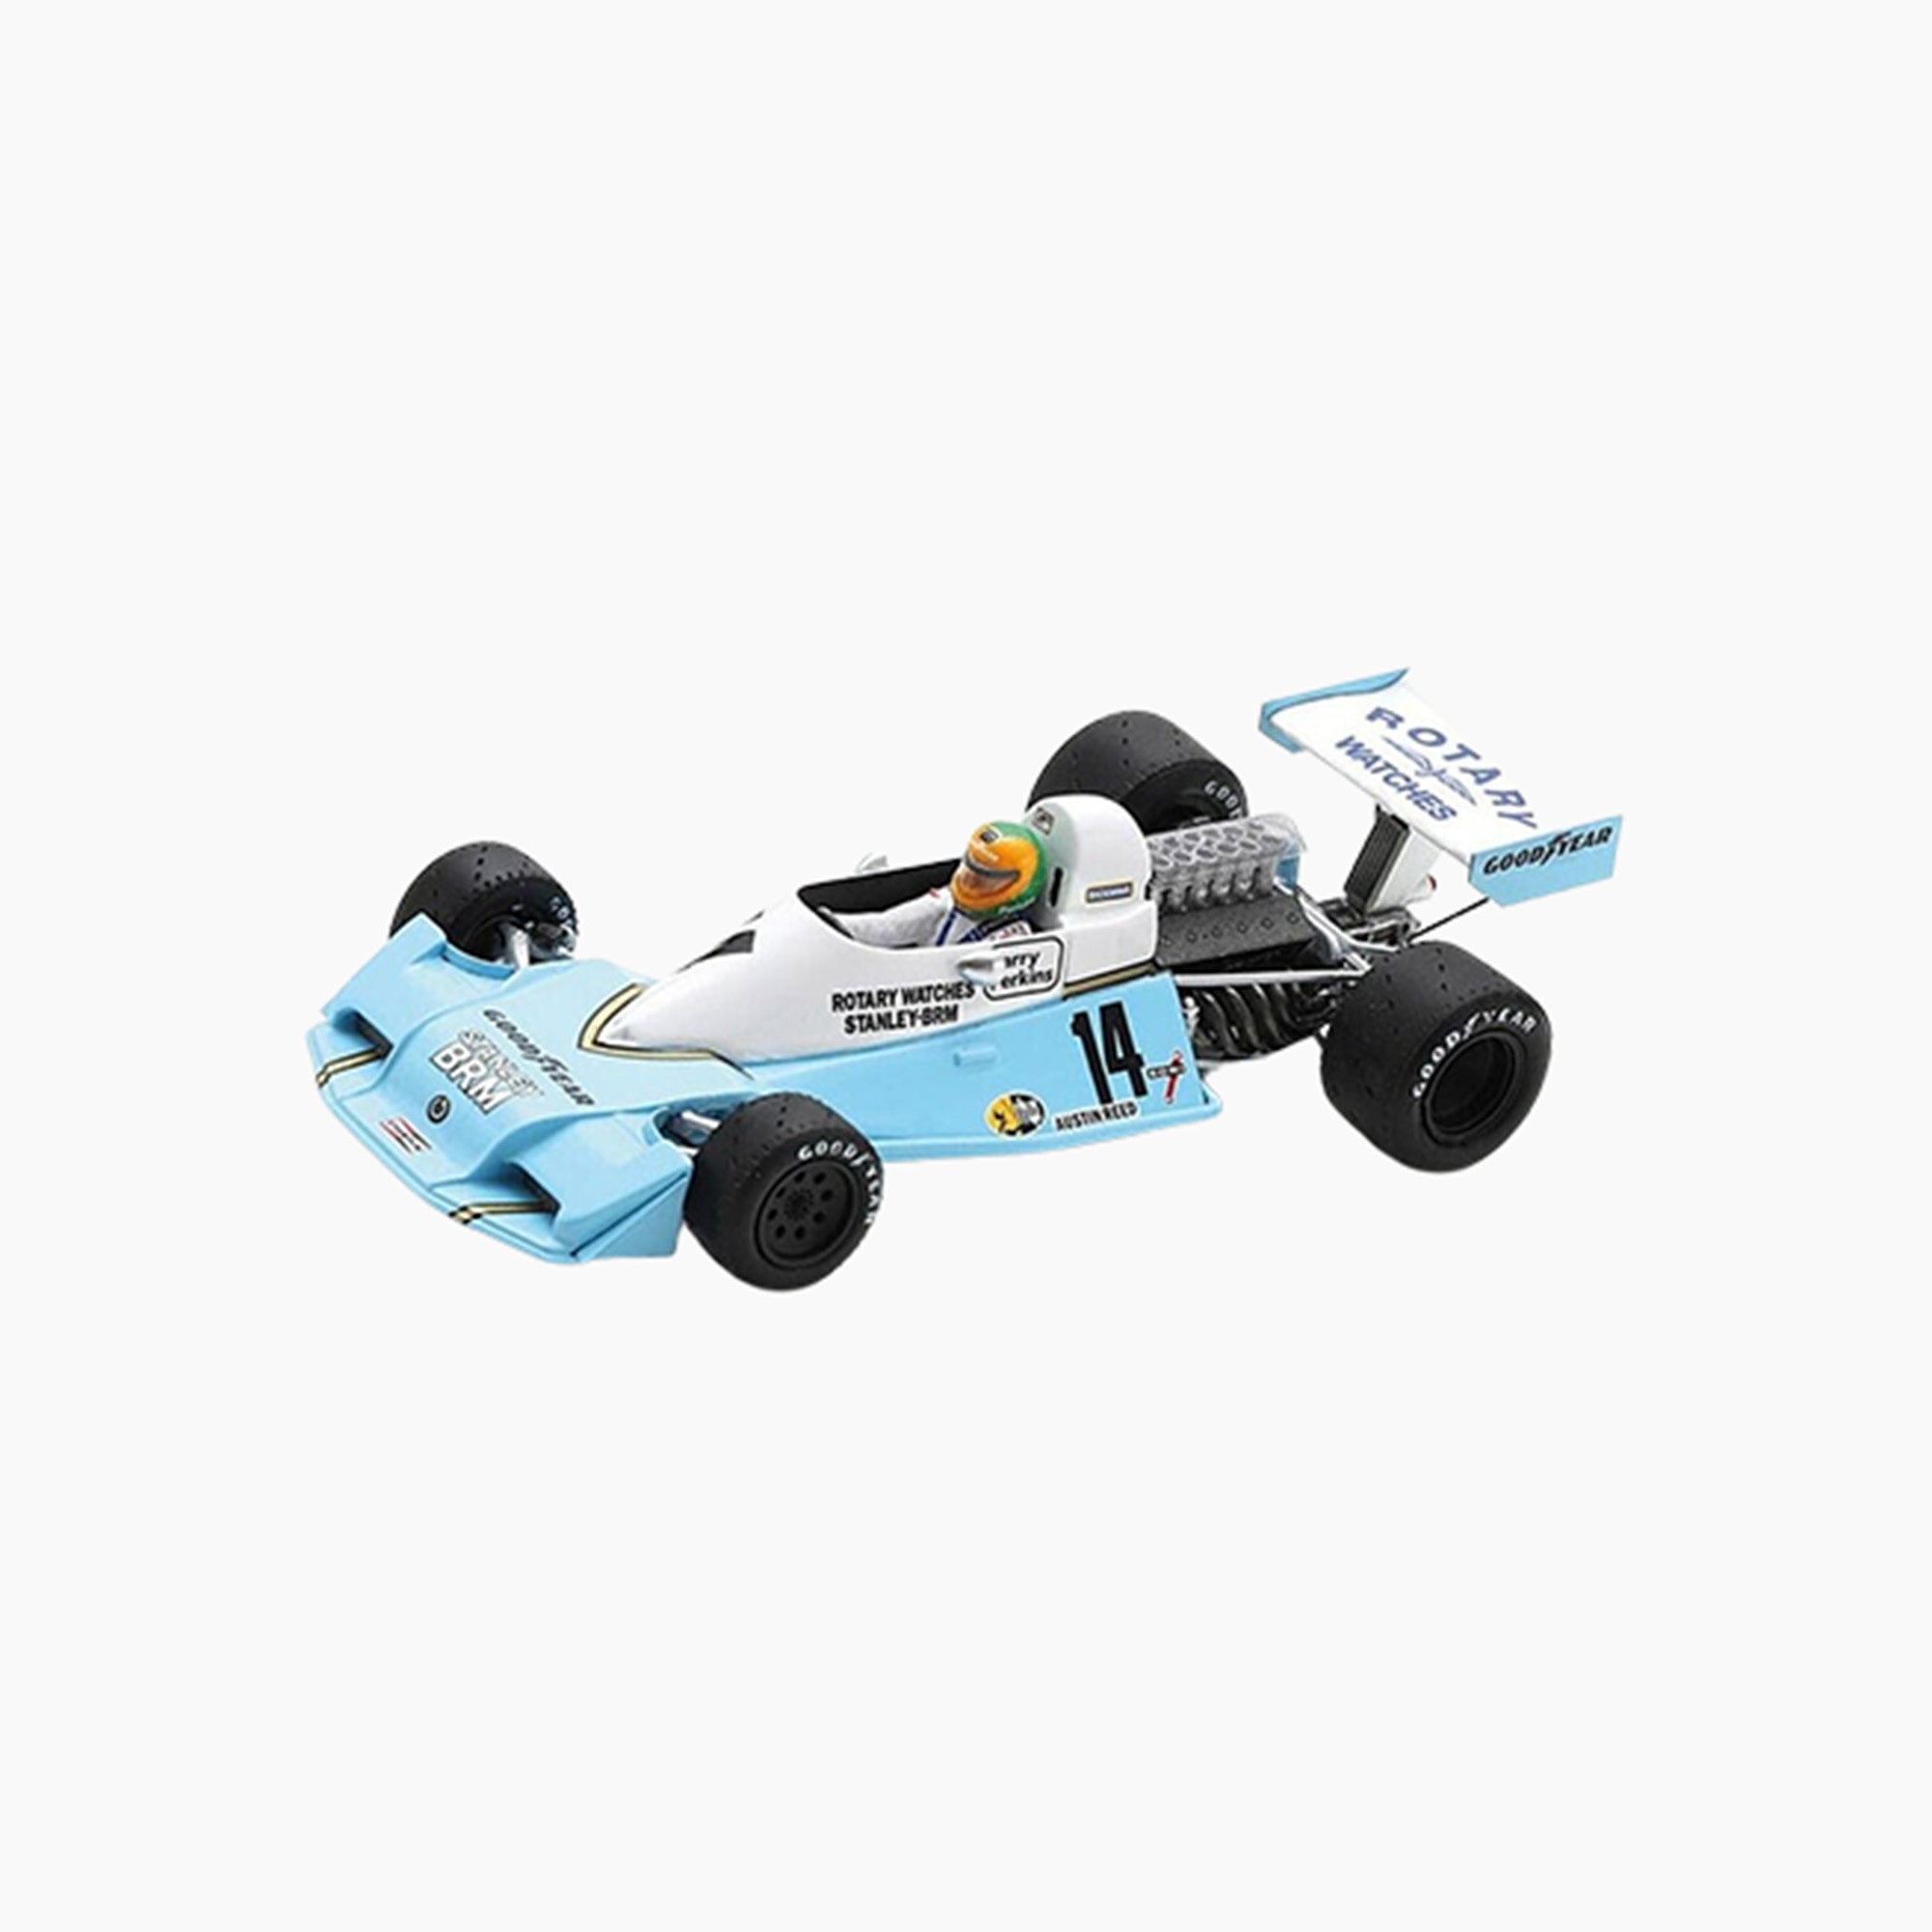 BRM P201B No.14 South African GP 1977 | 1:43 Scale Model-1:43 Scale Model-Spark Models-gpx-store